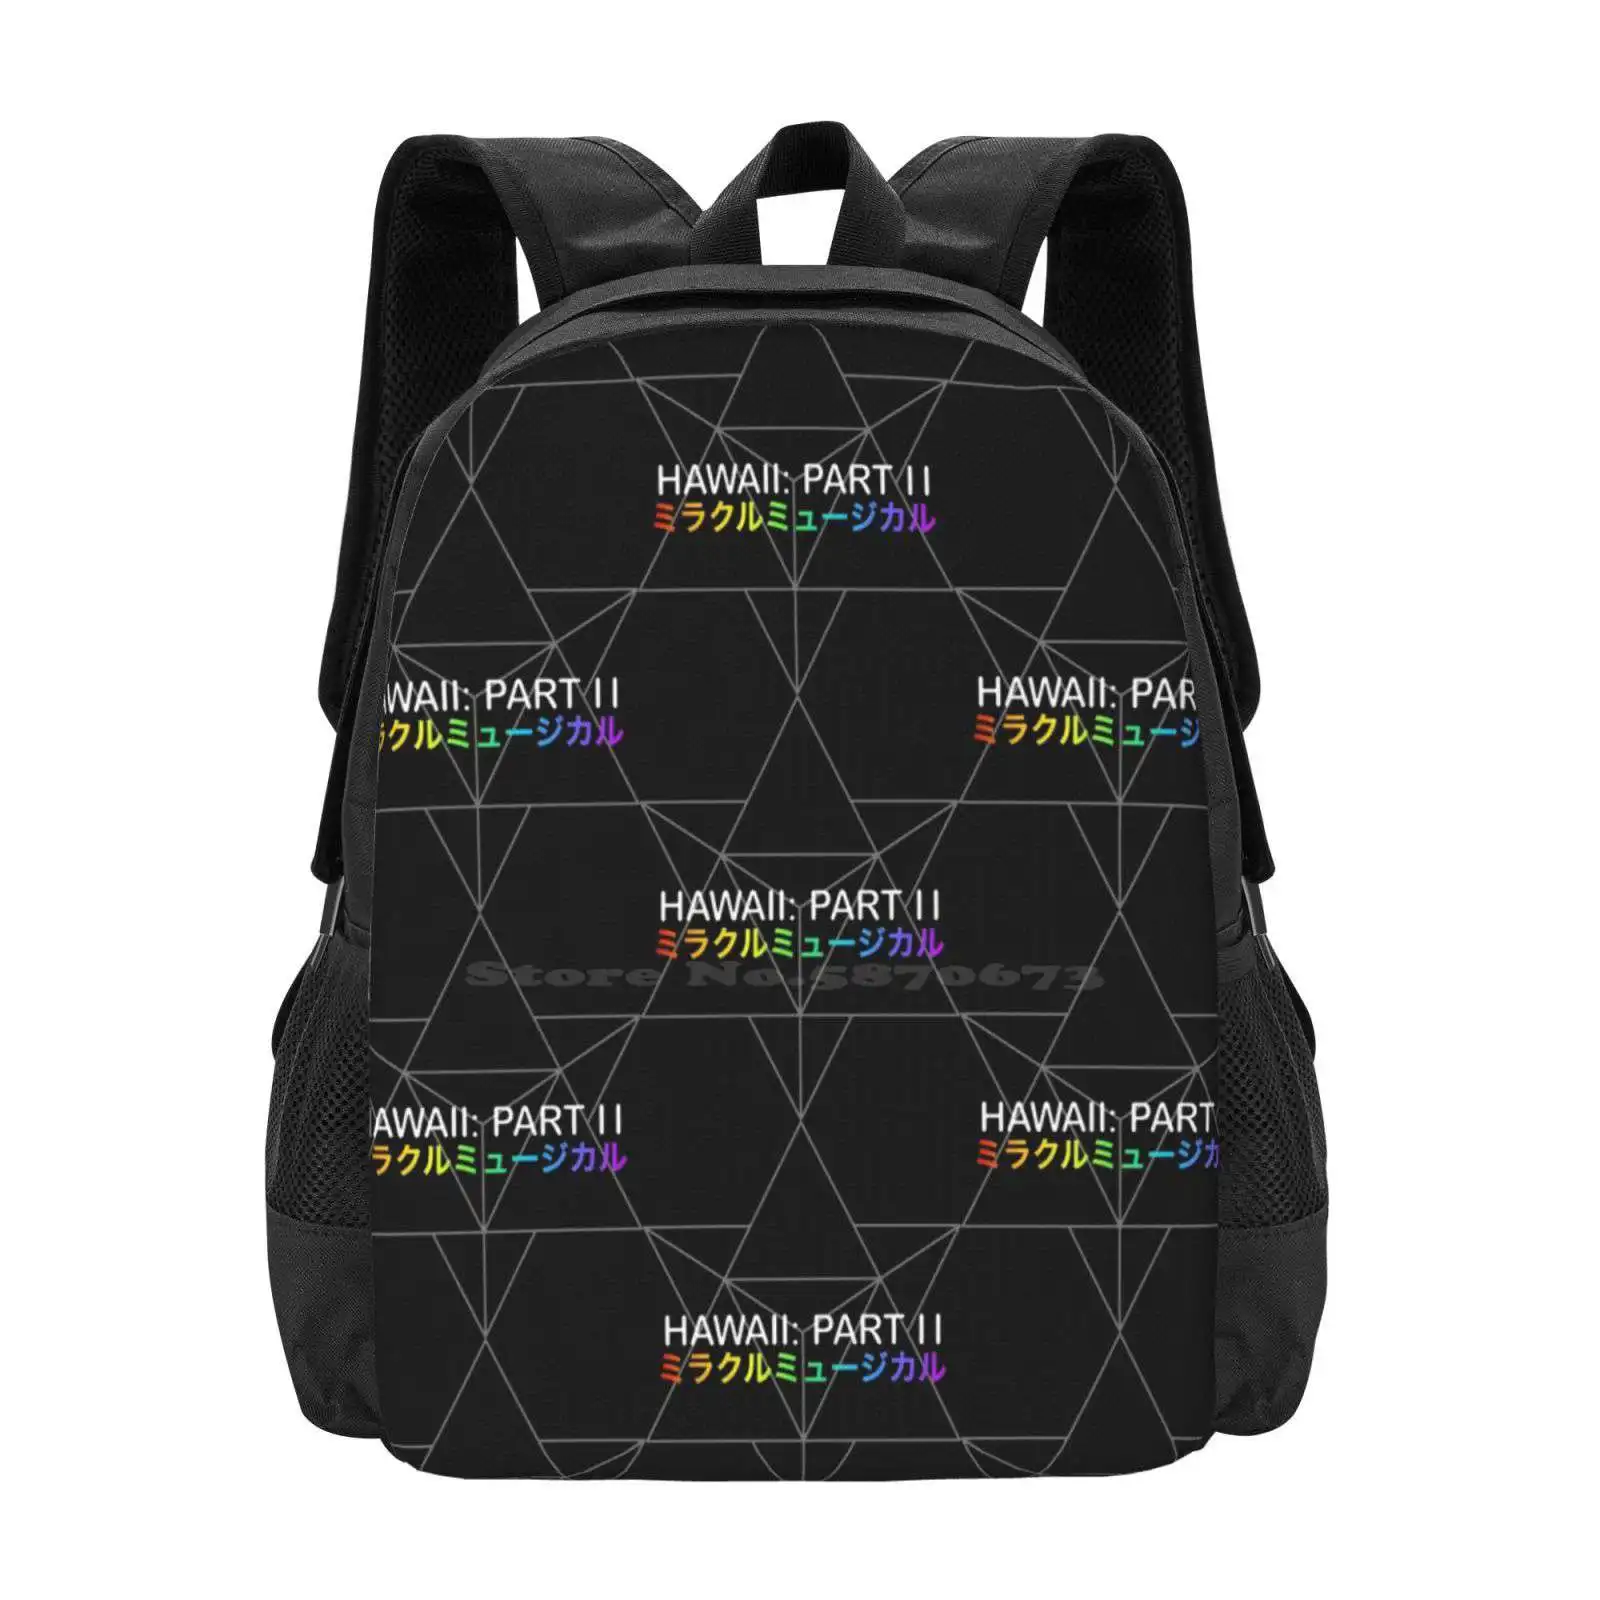 

Miracle Musical-Hawaii : Part Ii ( Black ) Fashion Pattern Design Travel Laptop School Backpack Bag Tally Hall Band Miracle